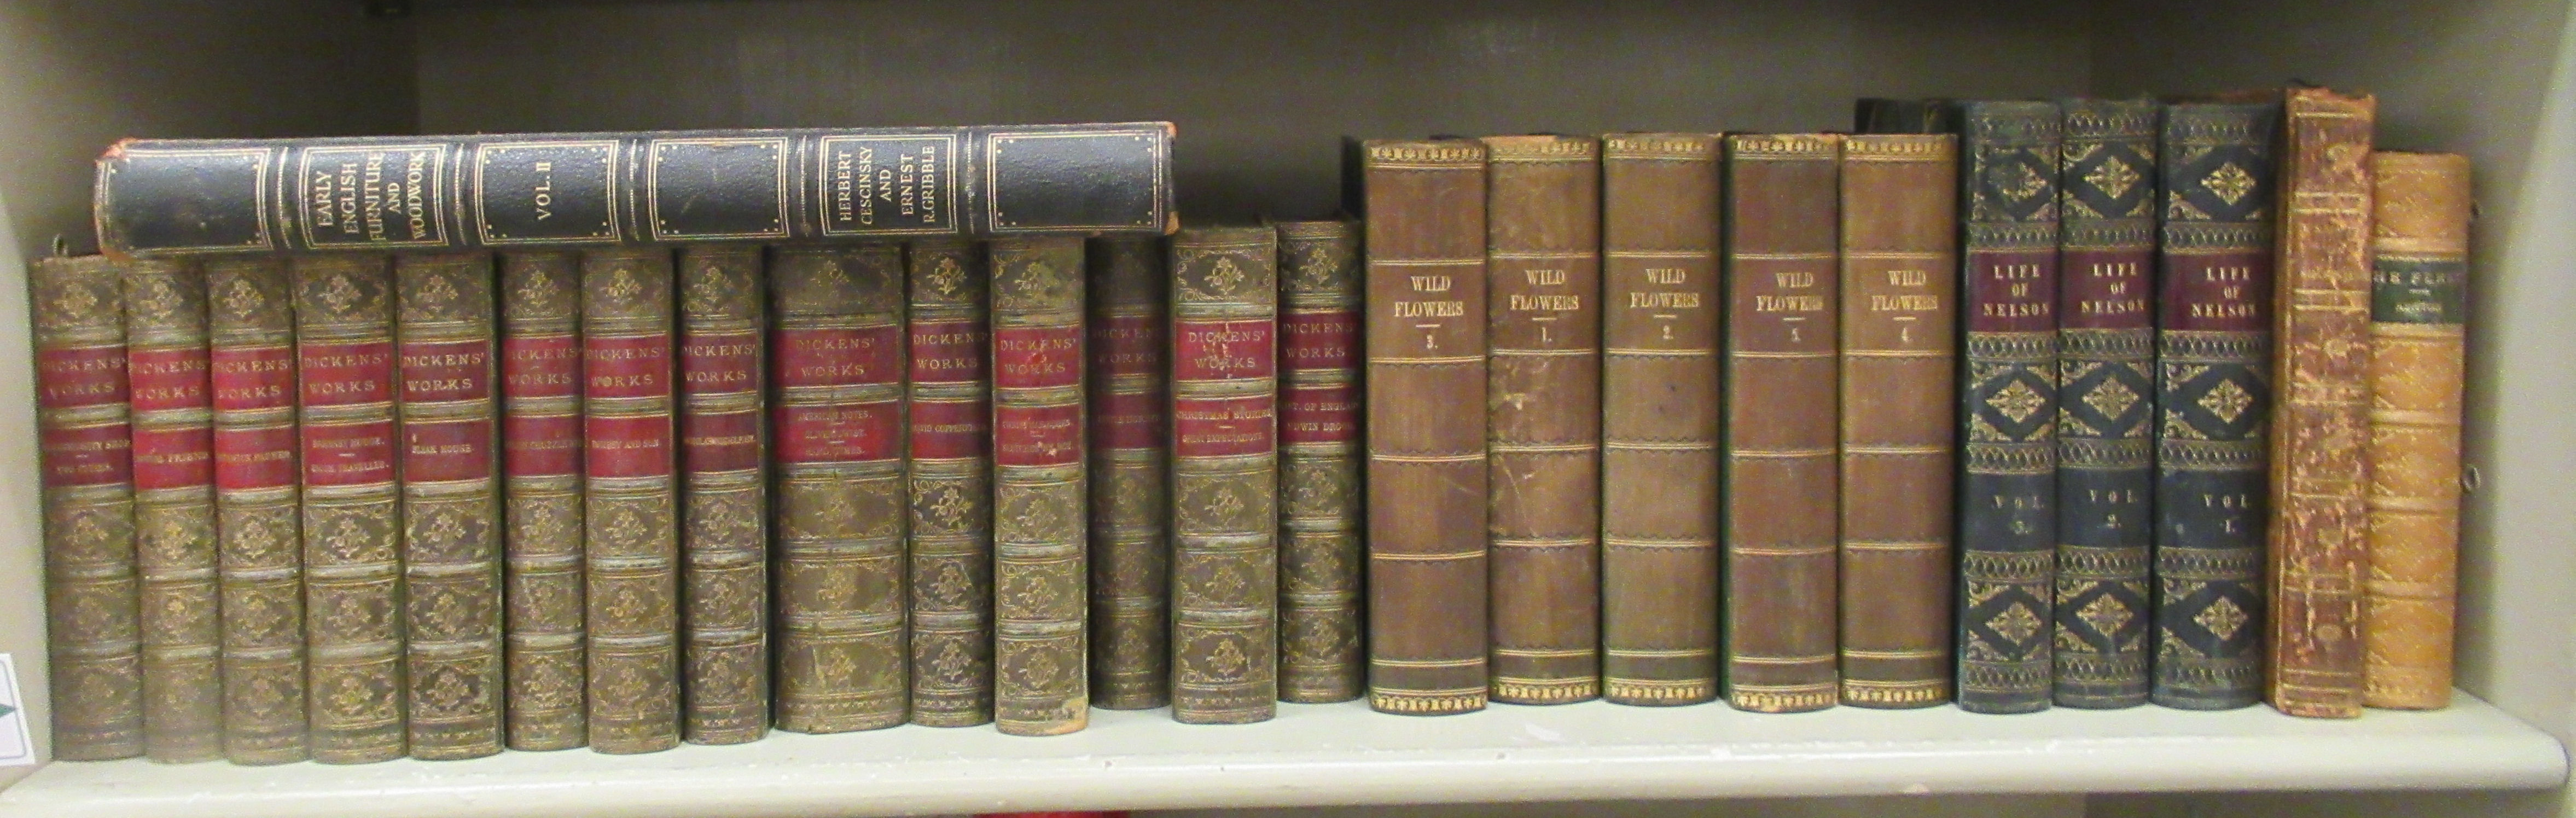 Books: to include works by Charles Dickens, published in fourteen half-calf bound volumes by Chapman